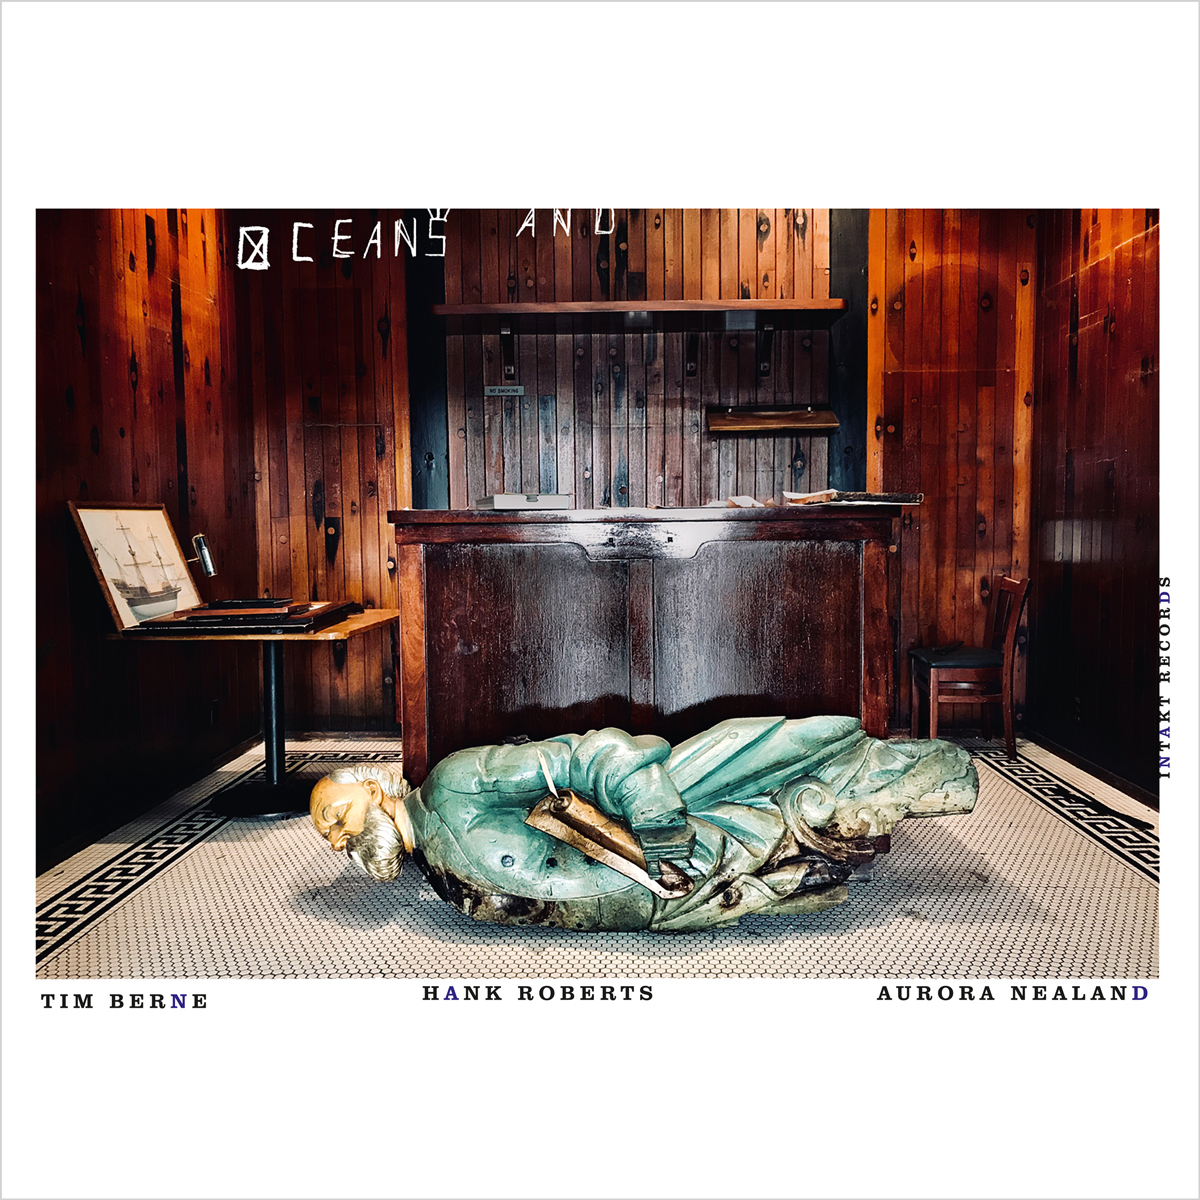 TIM BERNE – HANK ROBERTS – AURORA NEALAND
OCEANS AND cover front intakt records